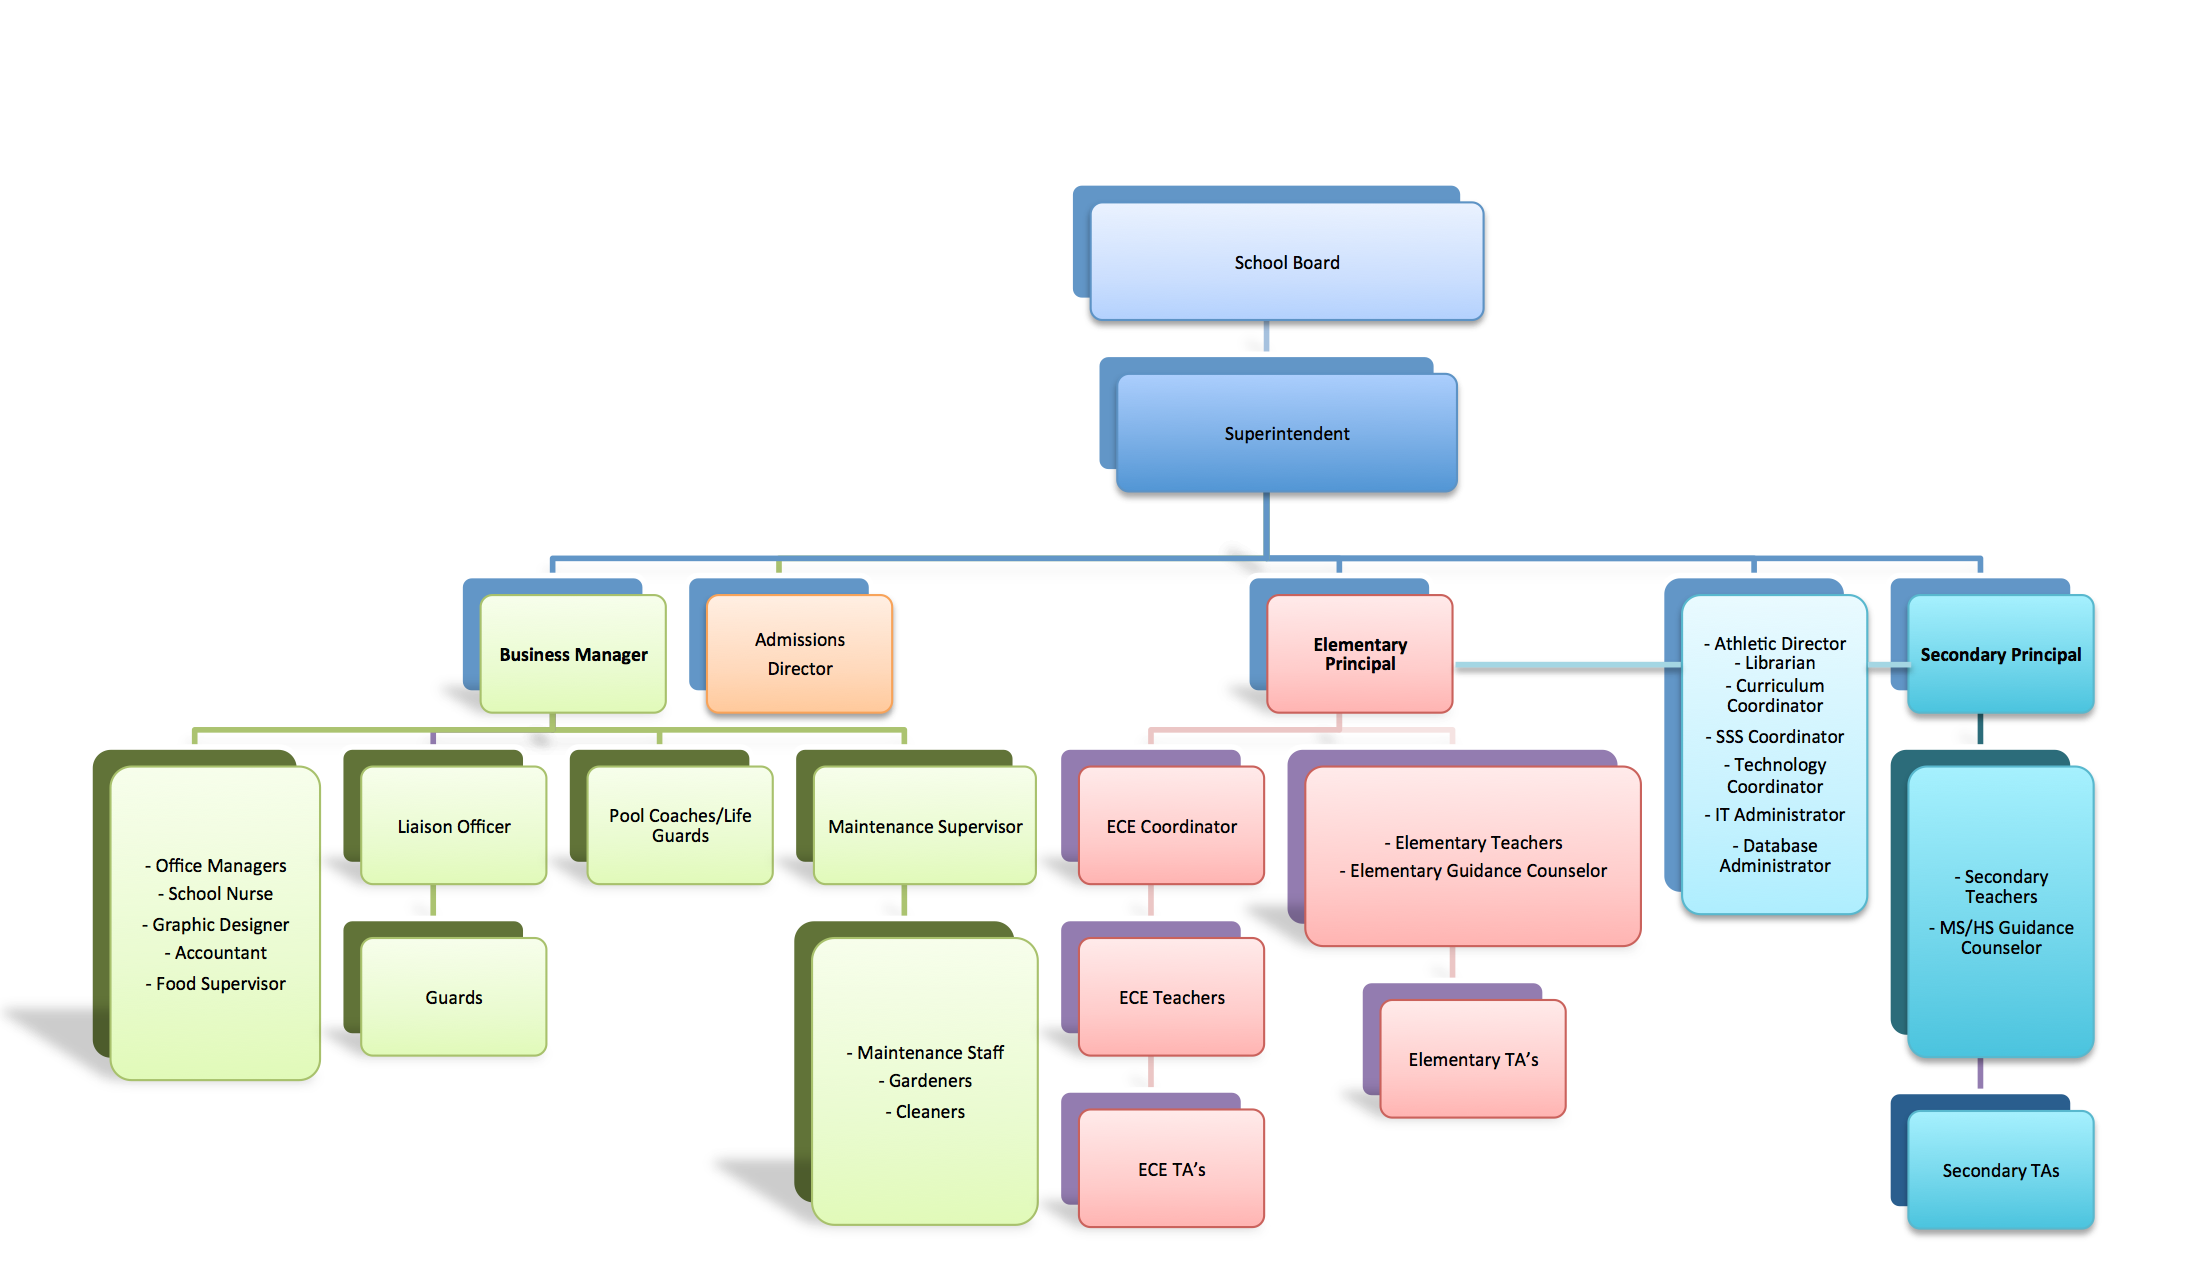 Office Of Admissions Organizational Chart